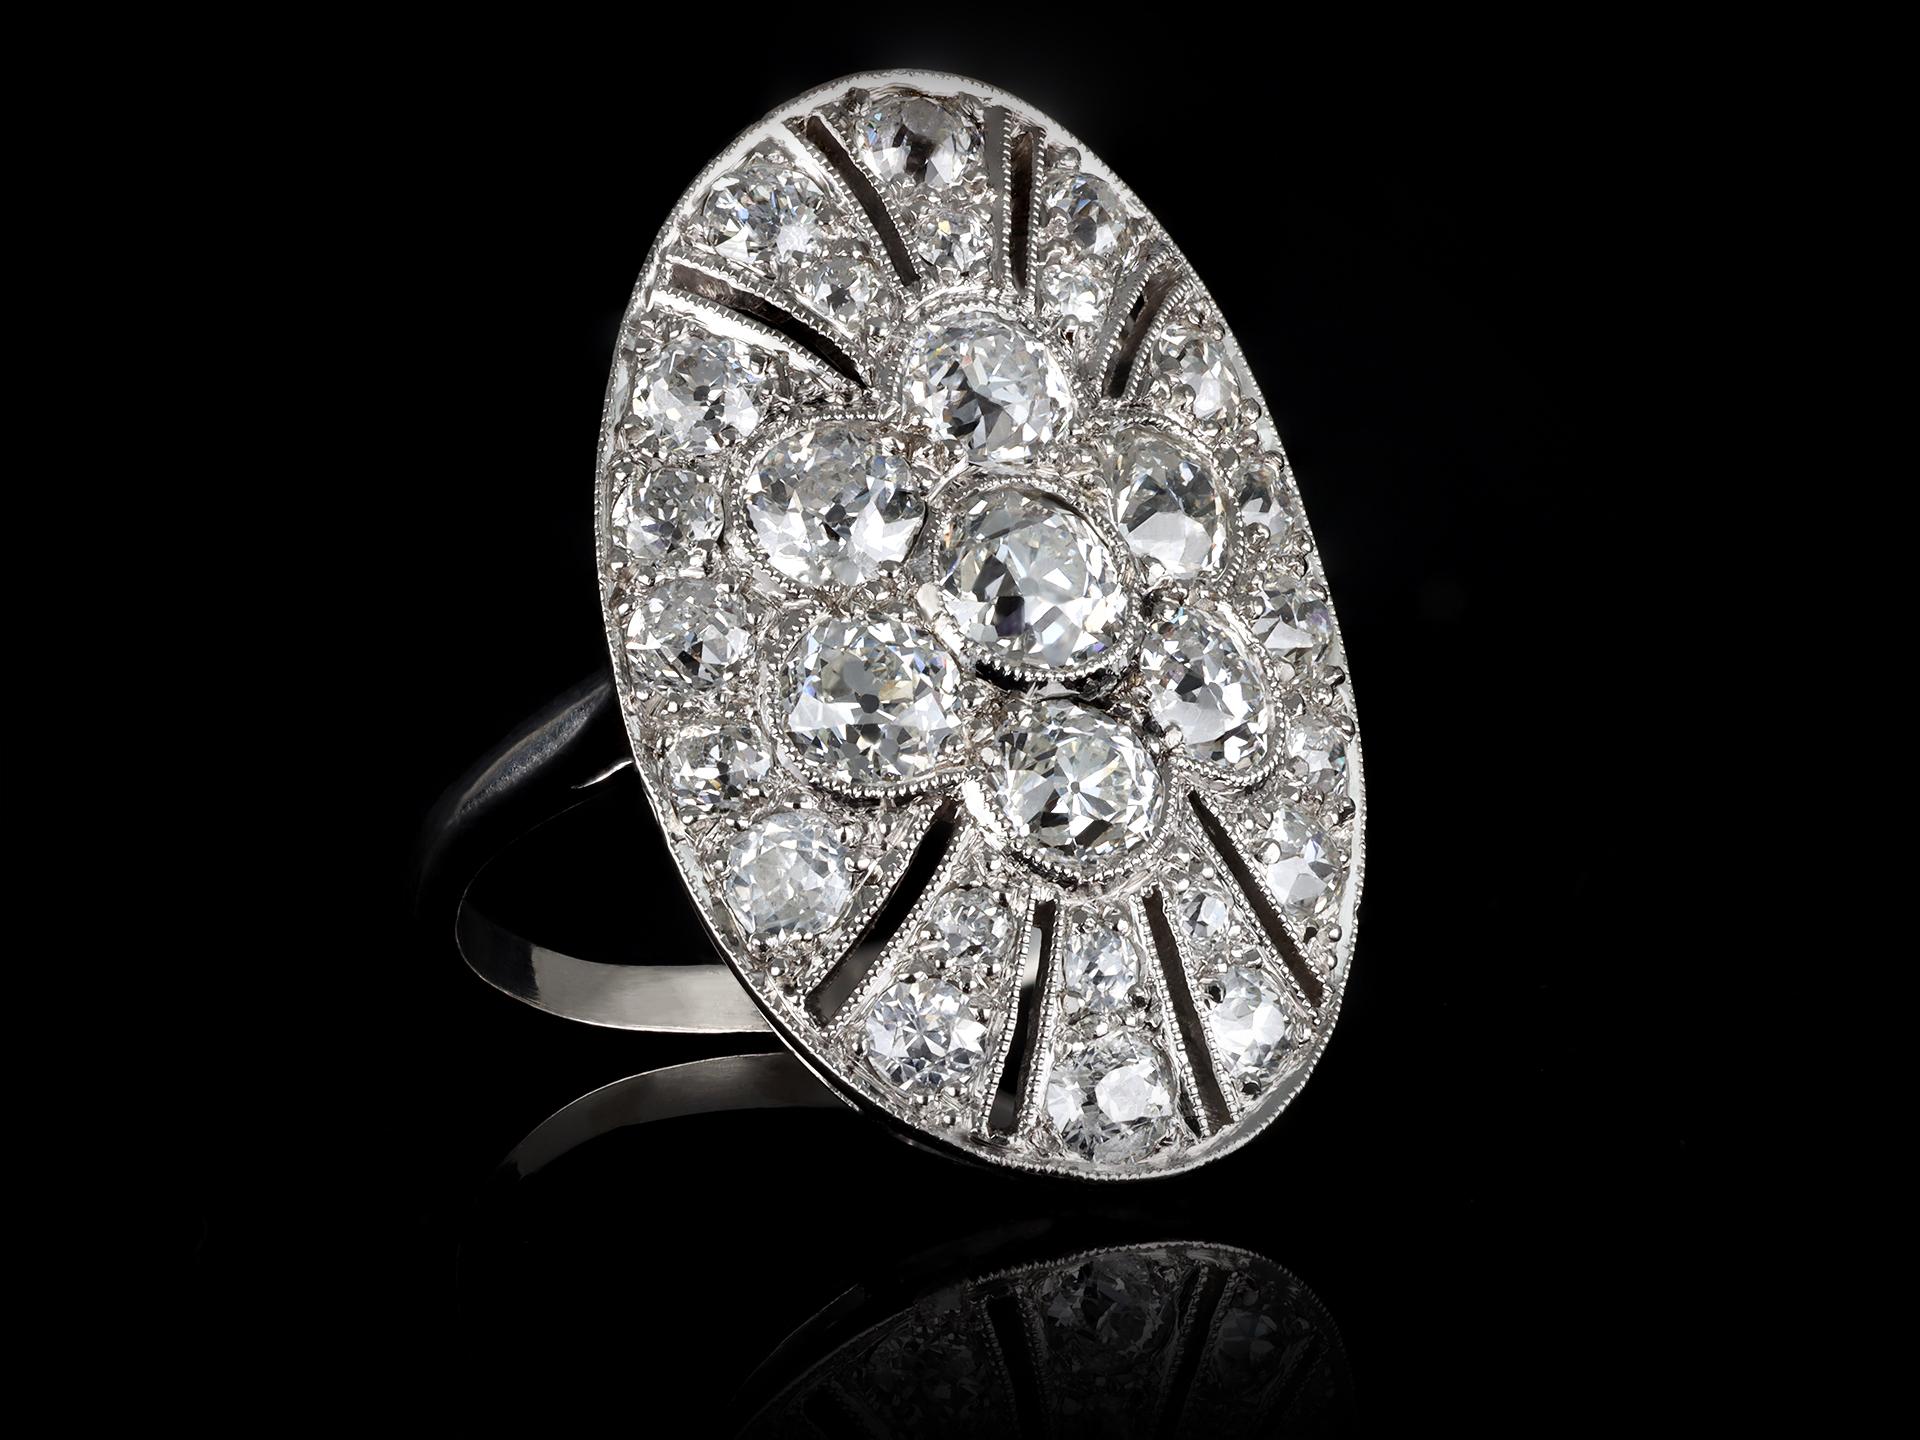 Women's Oval Diamond Cocktail Ring, circa 1920. For Sale